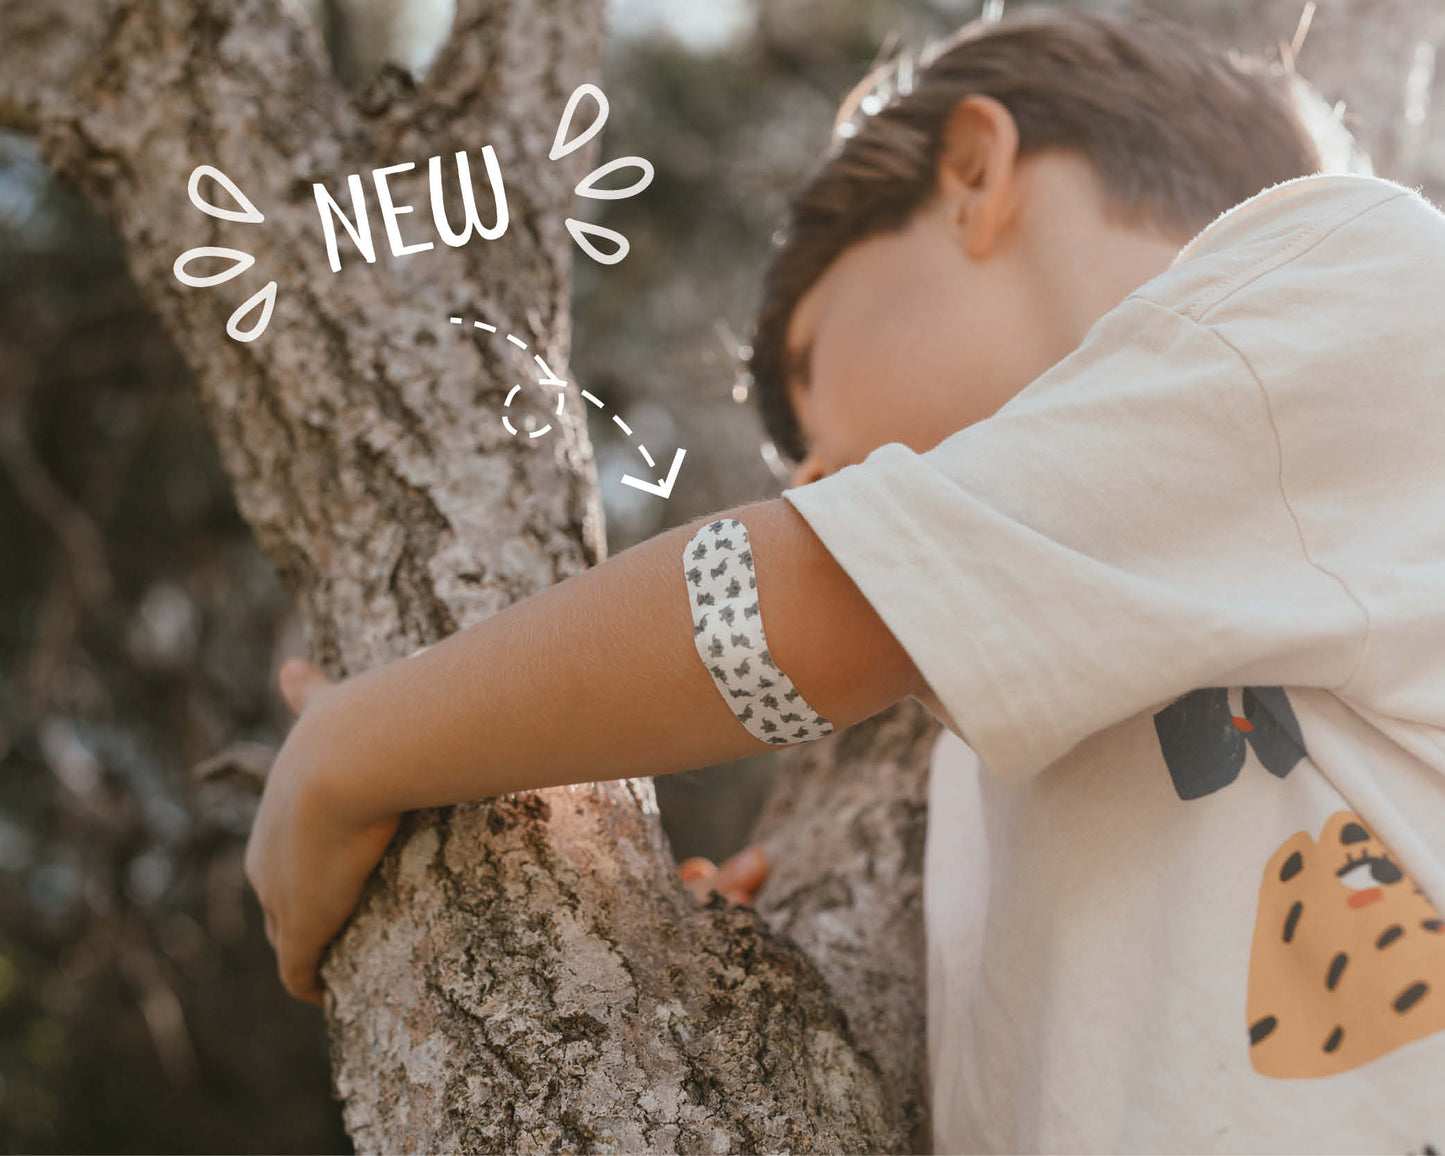 *NEW* Kids range comes to PATCH!